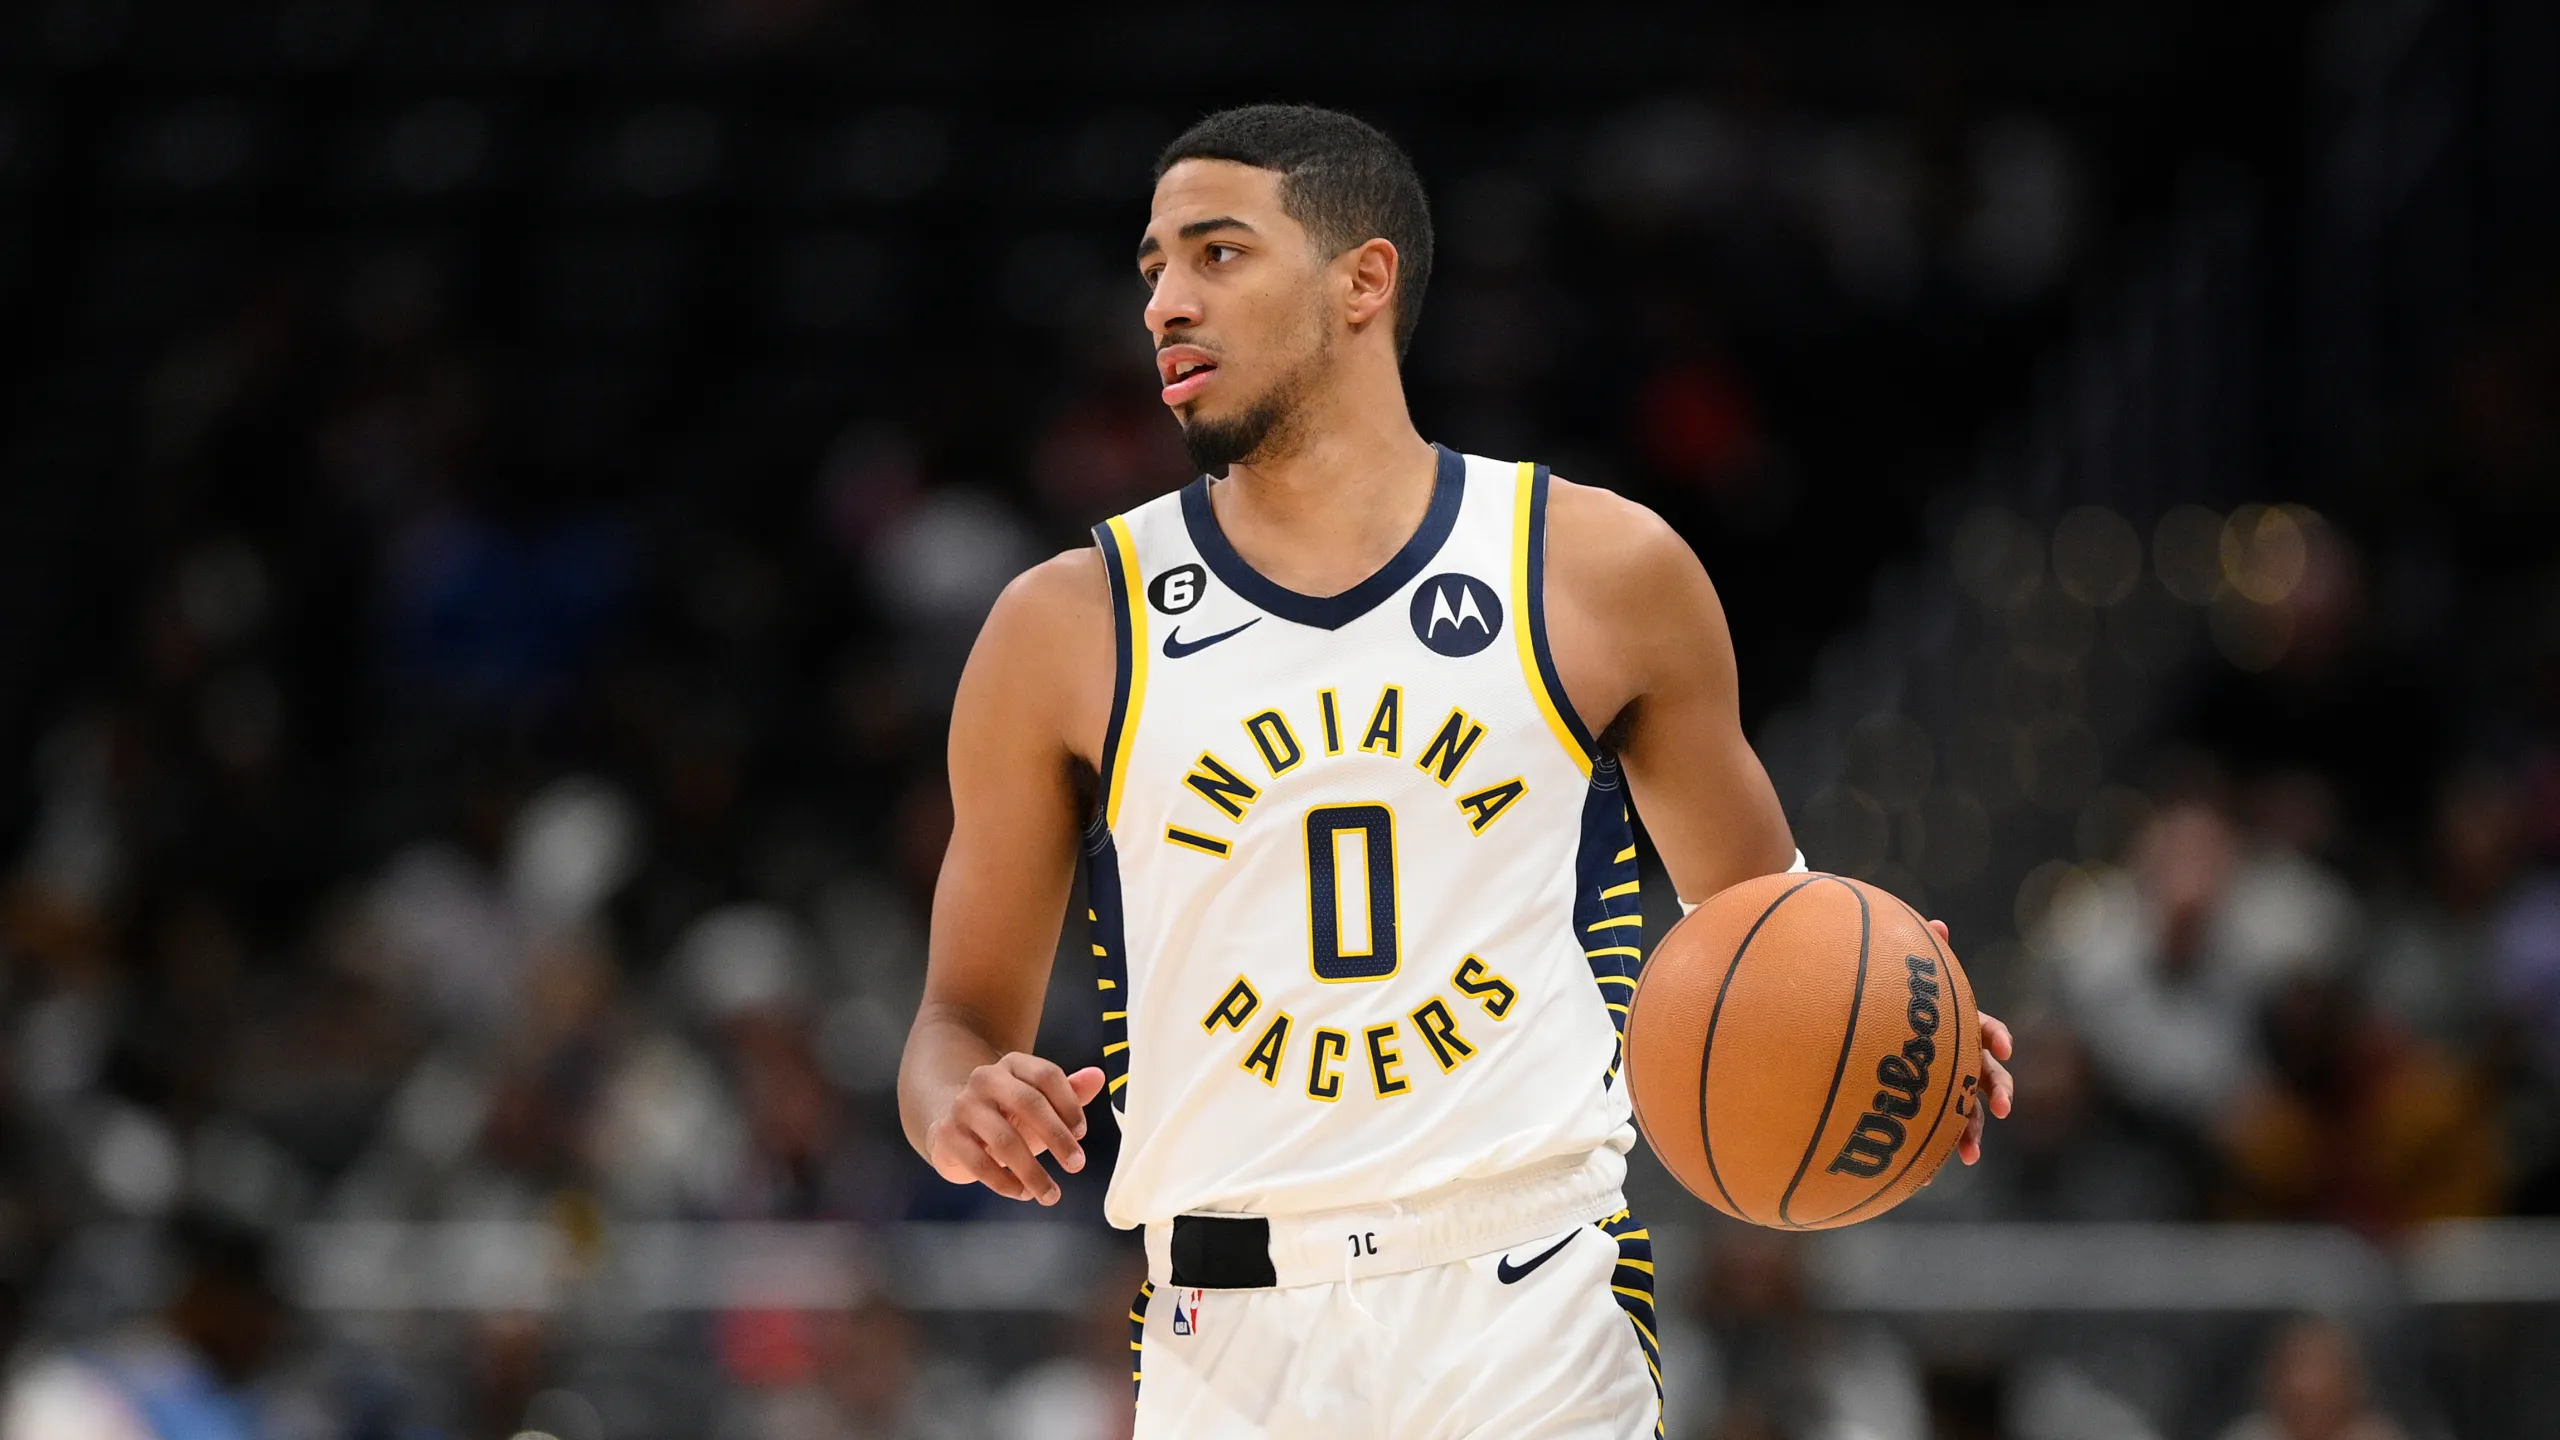 The Pacers' Rallying Point Tyrese Haliburton's Injury and Impending Return